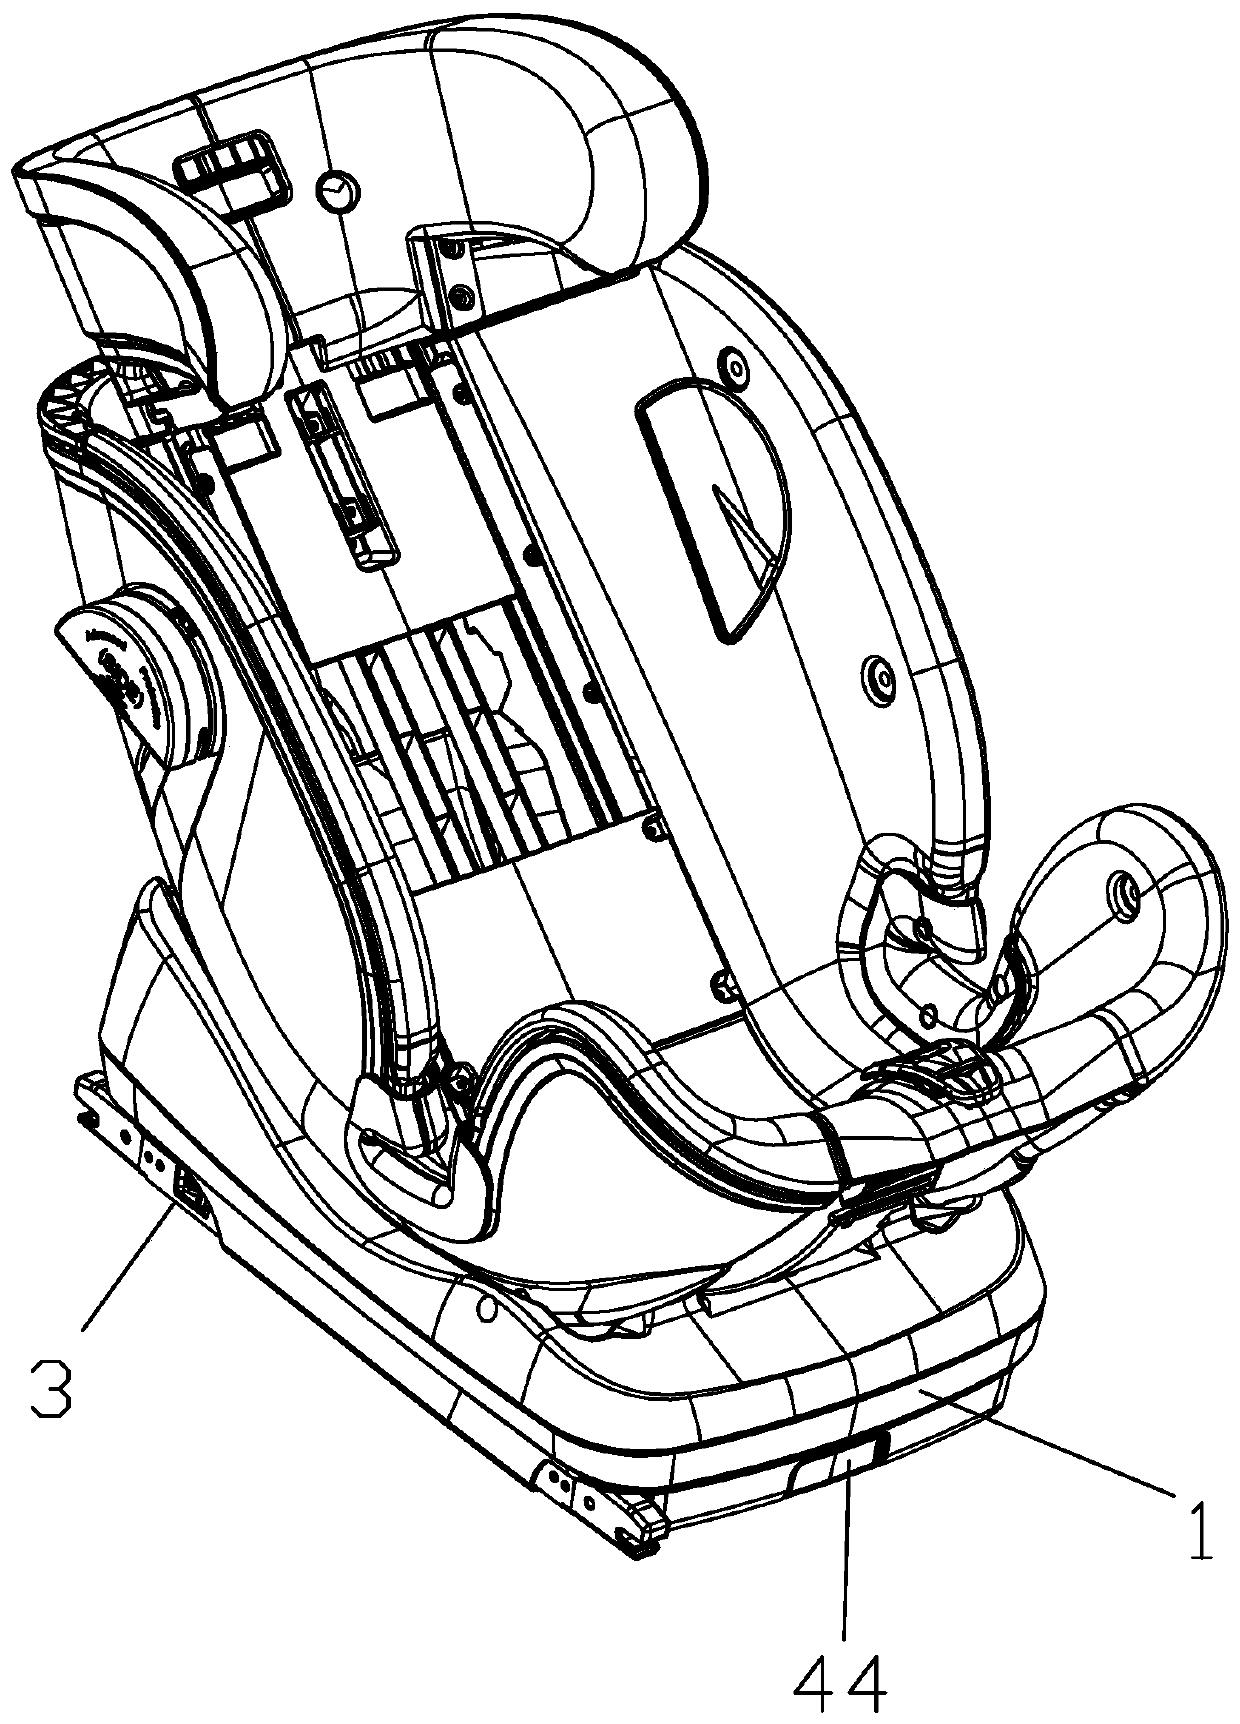 Child safety seat ISOFIX front and rear integrated expansion and contraction device